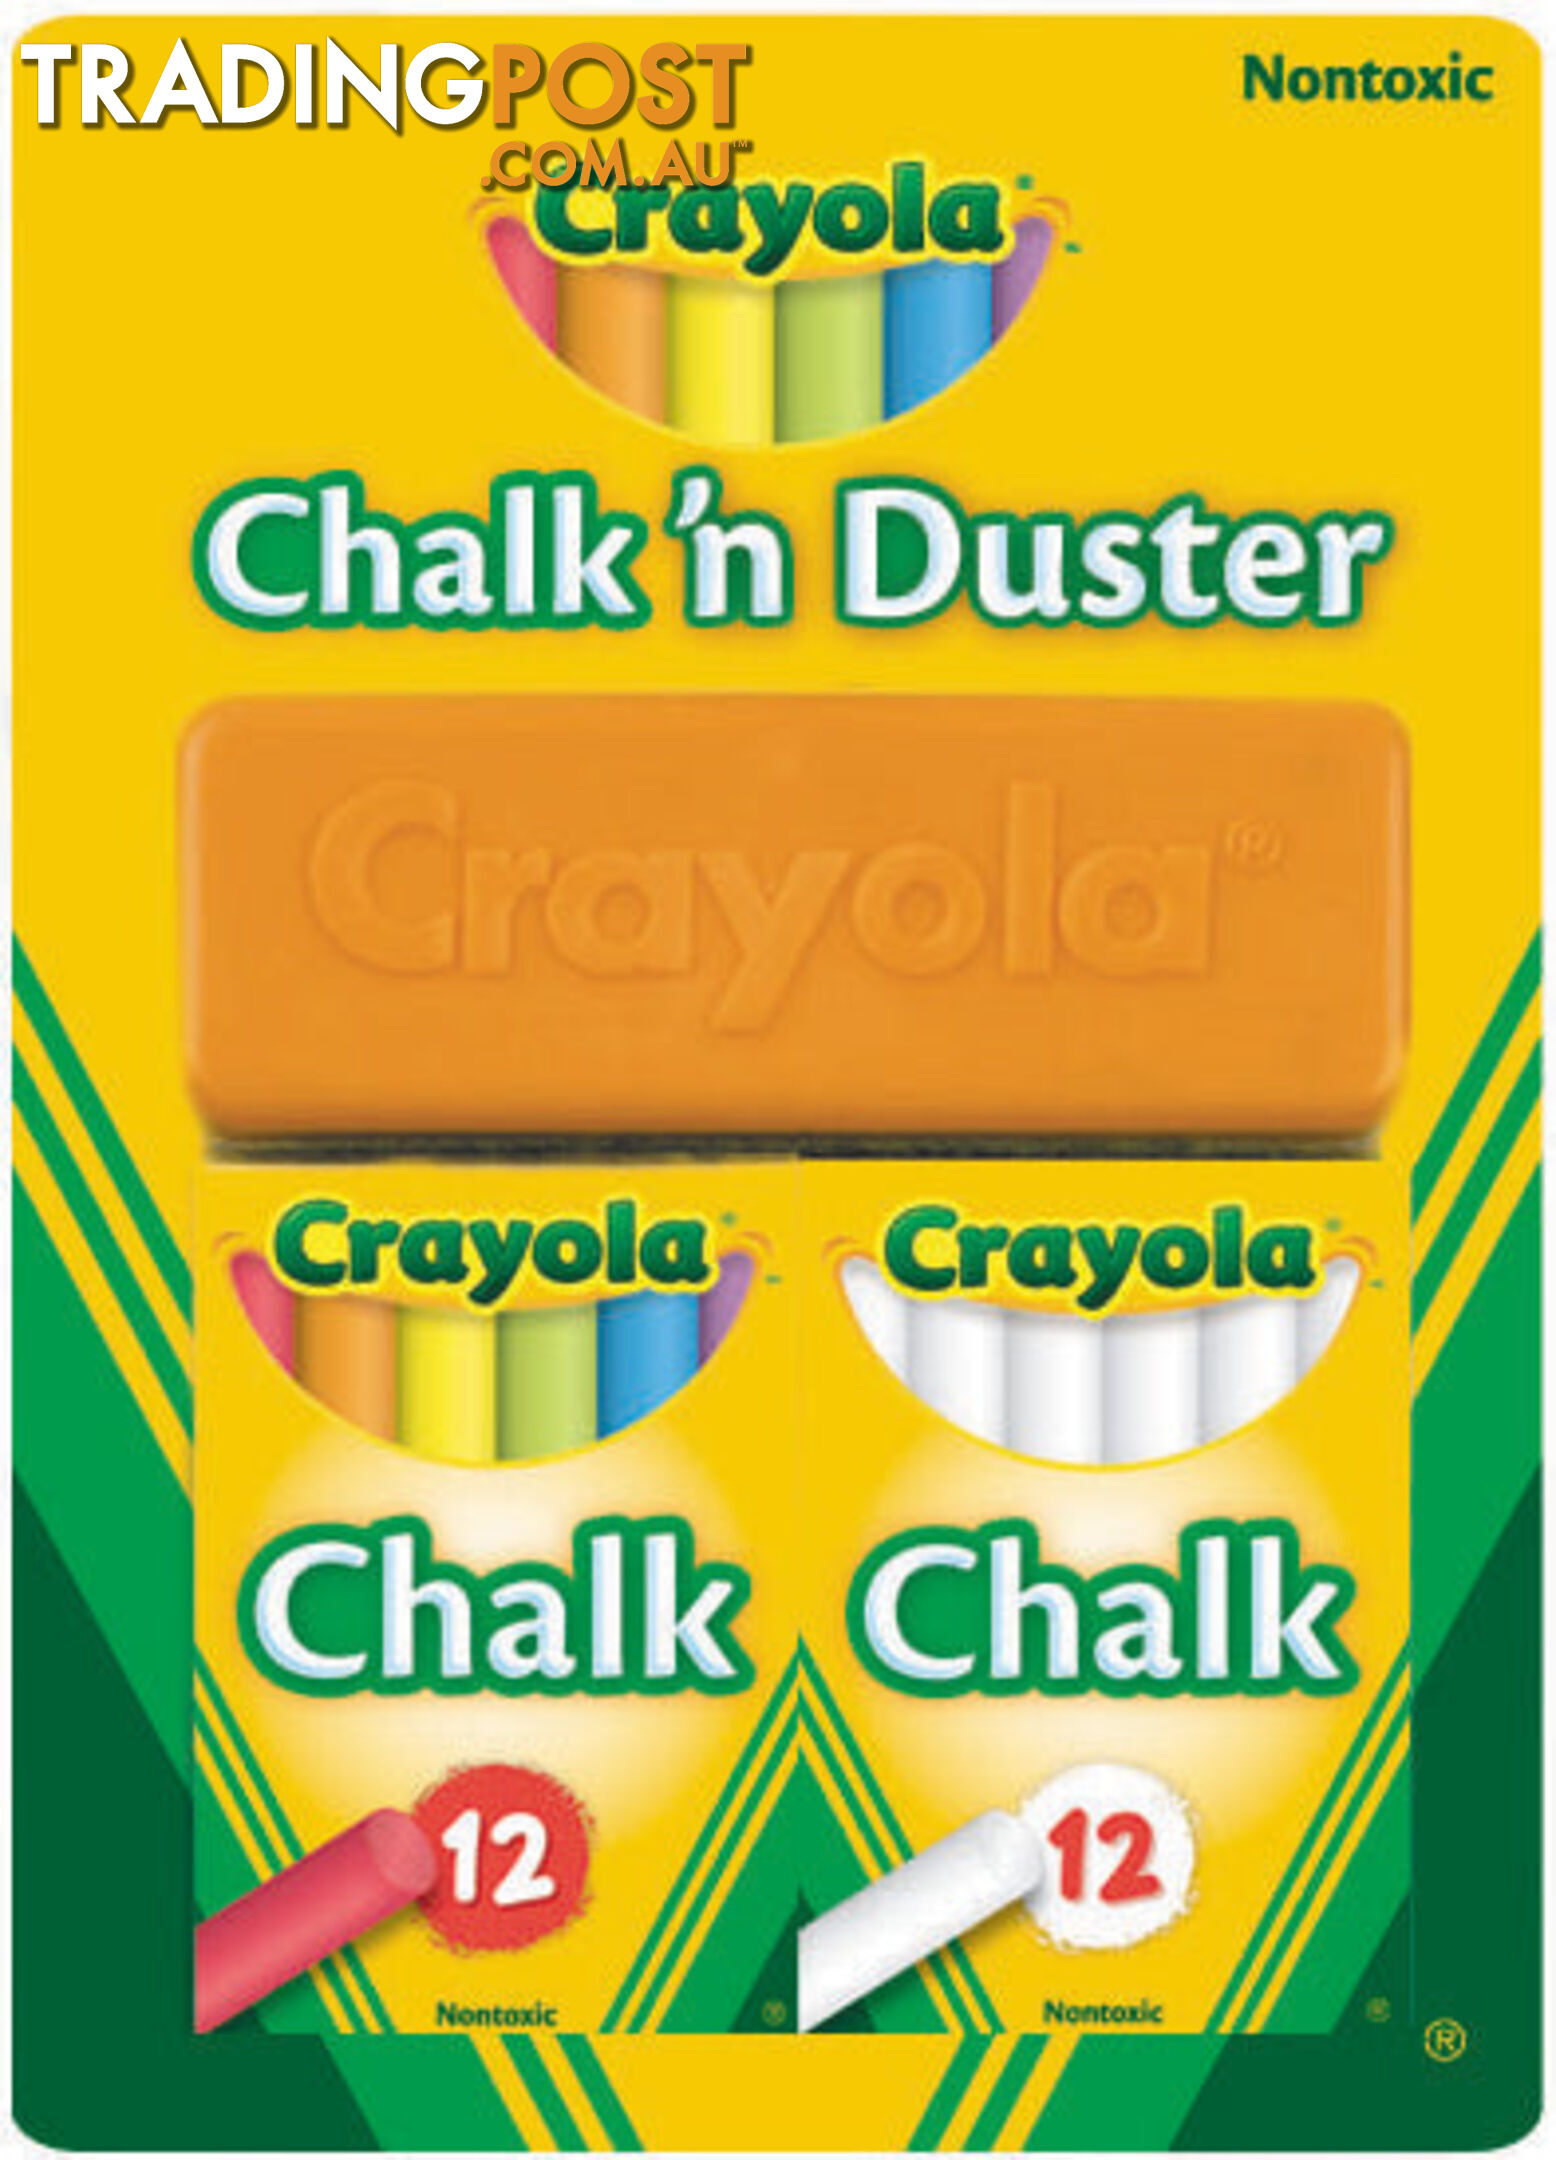 Crayola - Chalk N Duster Blister Pack - Bs516009 - 071662060091